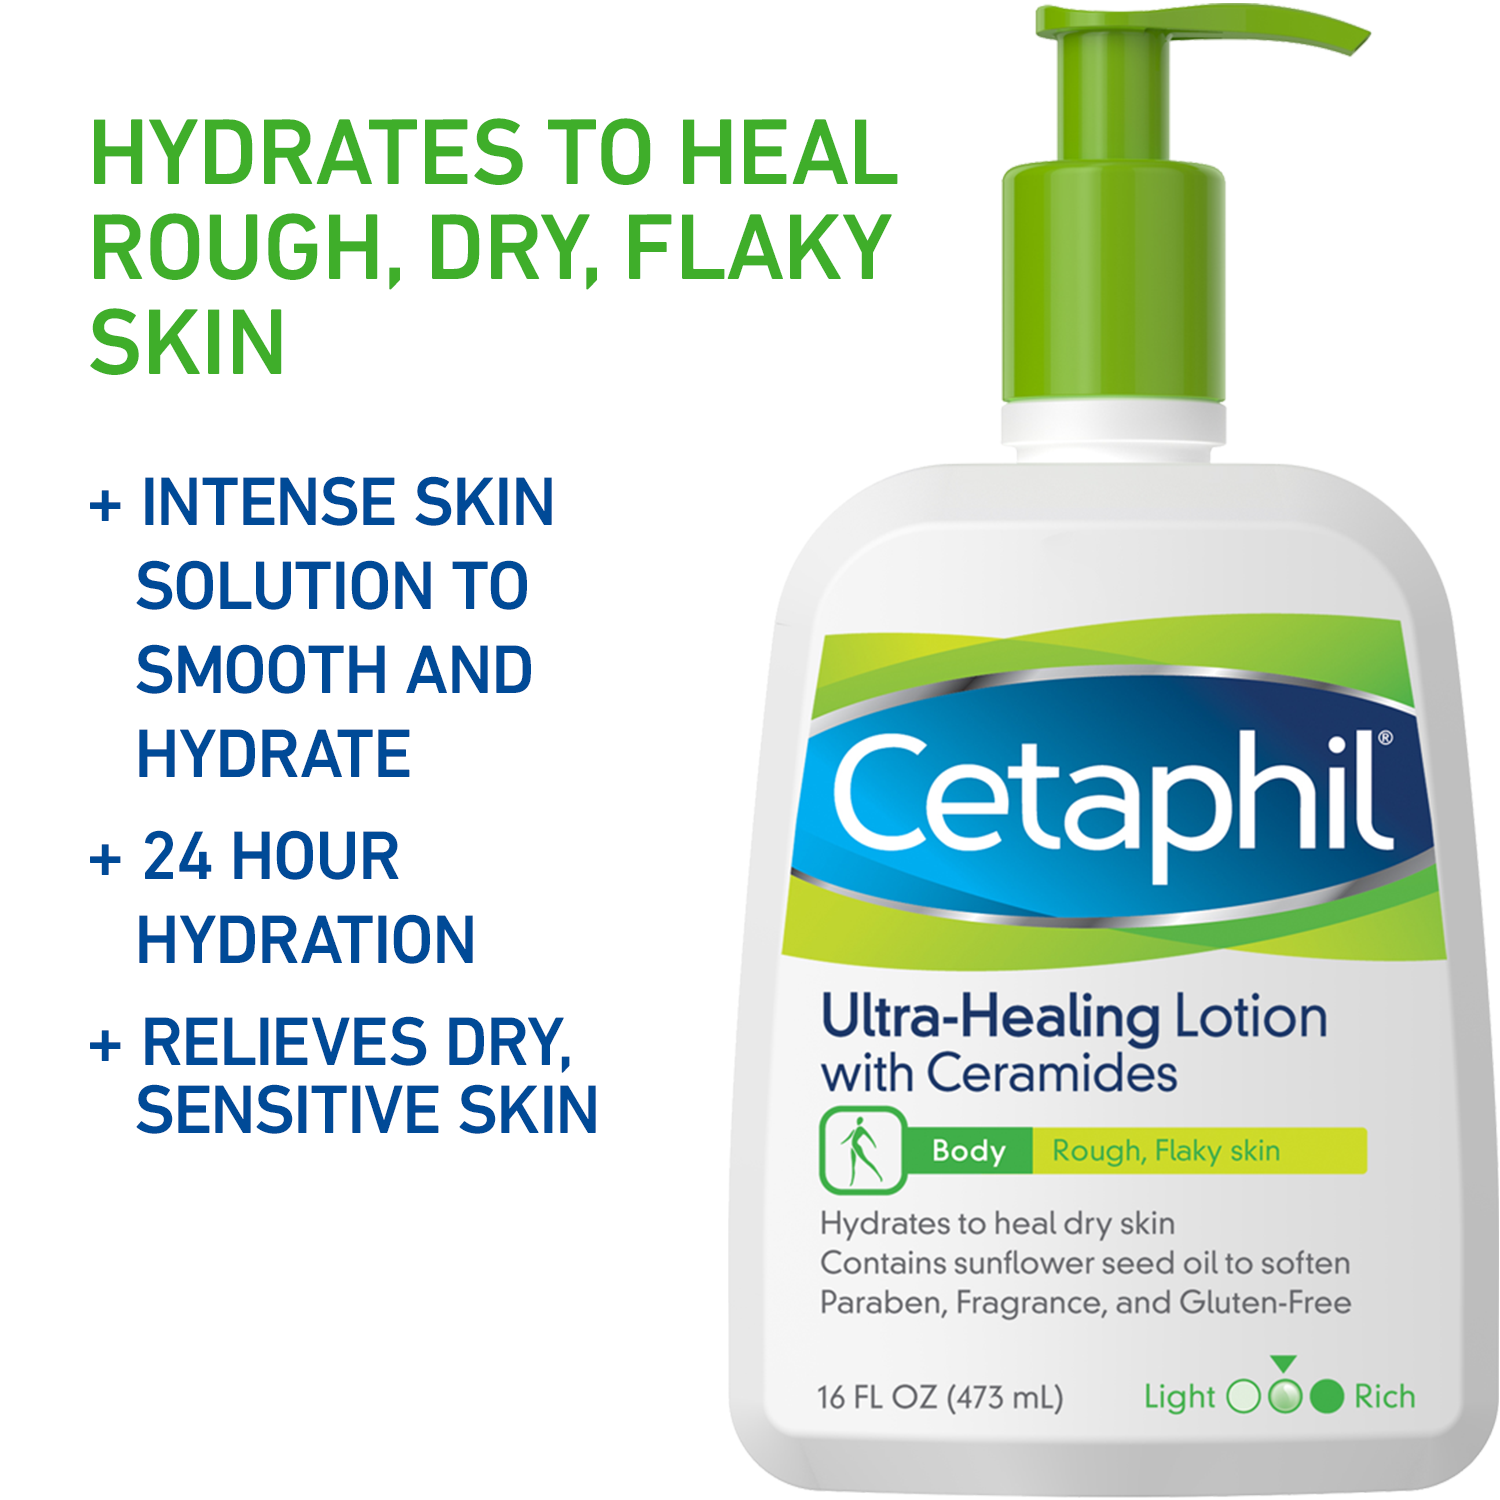 Cetaphil Intensive Healing Lotion with Ceramides, For Dry, Rough, Flaky Skin, 16 oz - image 3 of 11